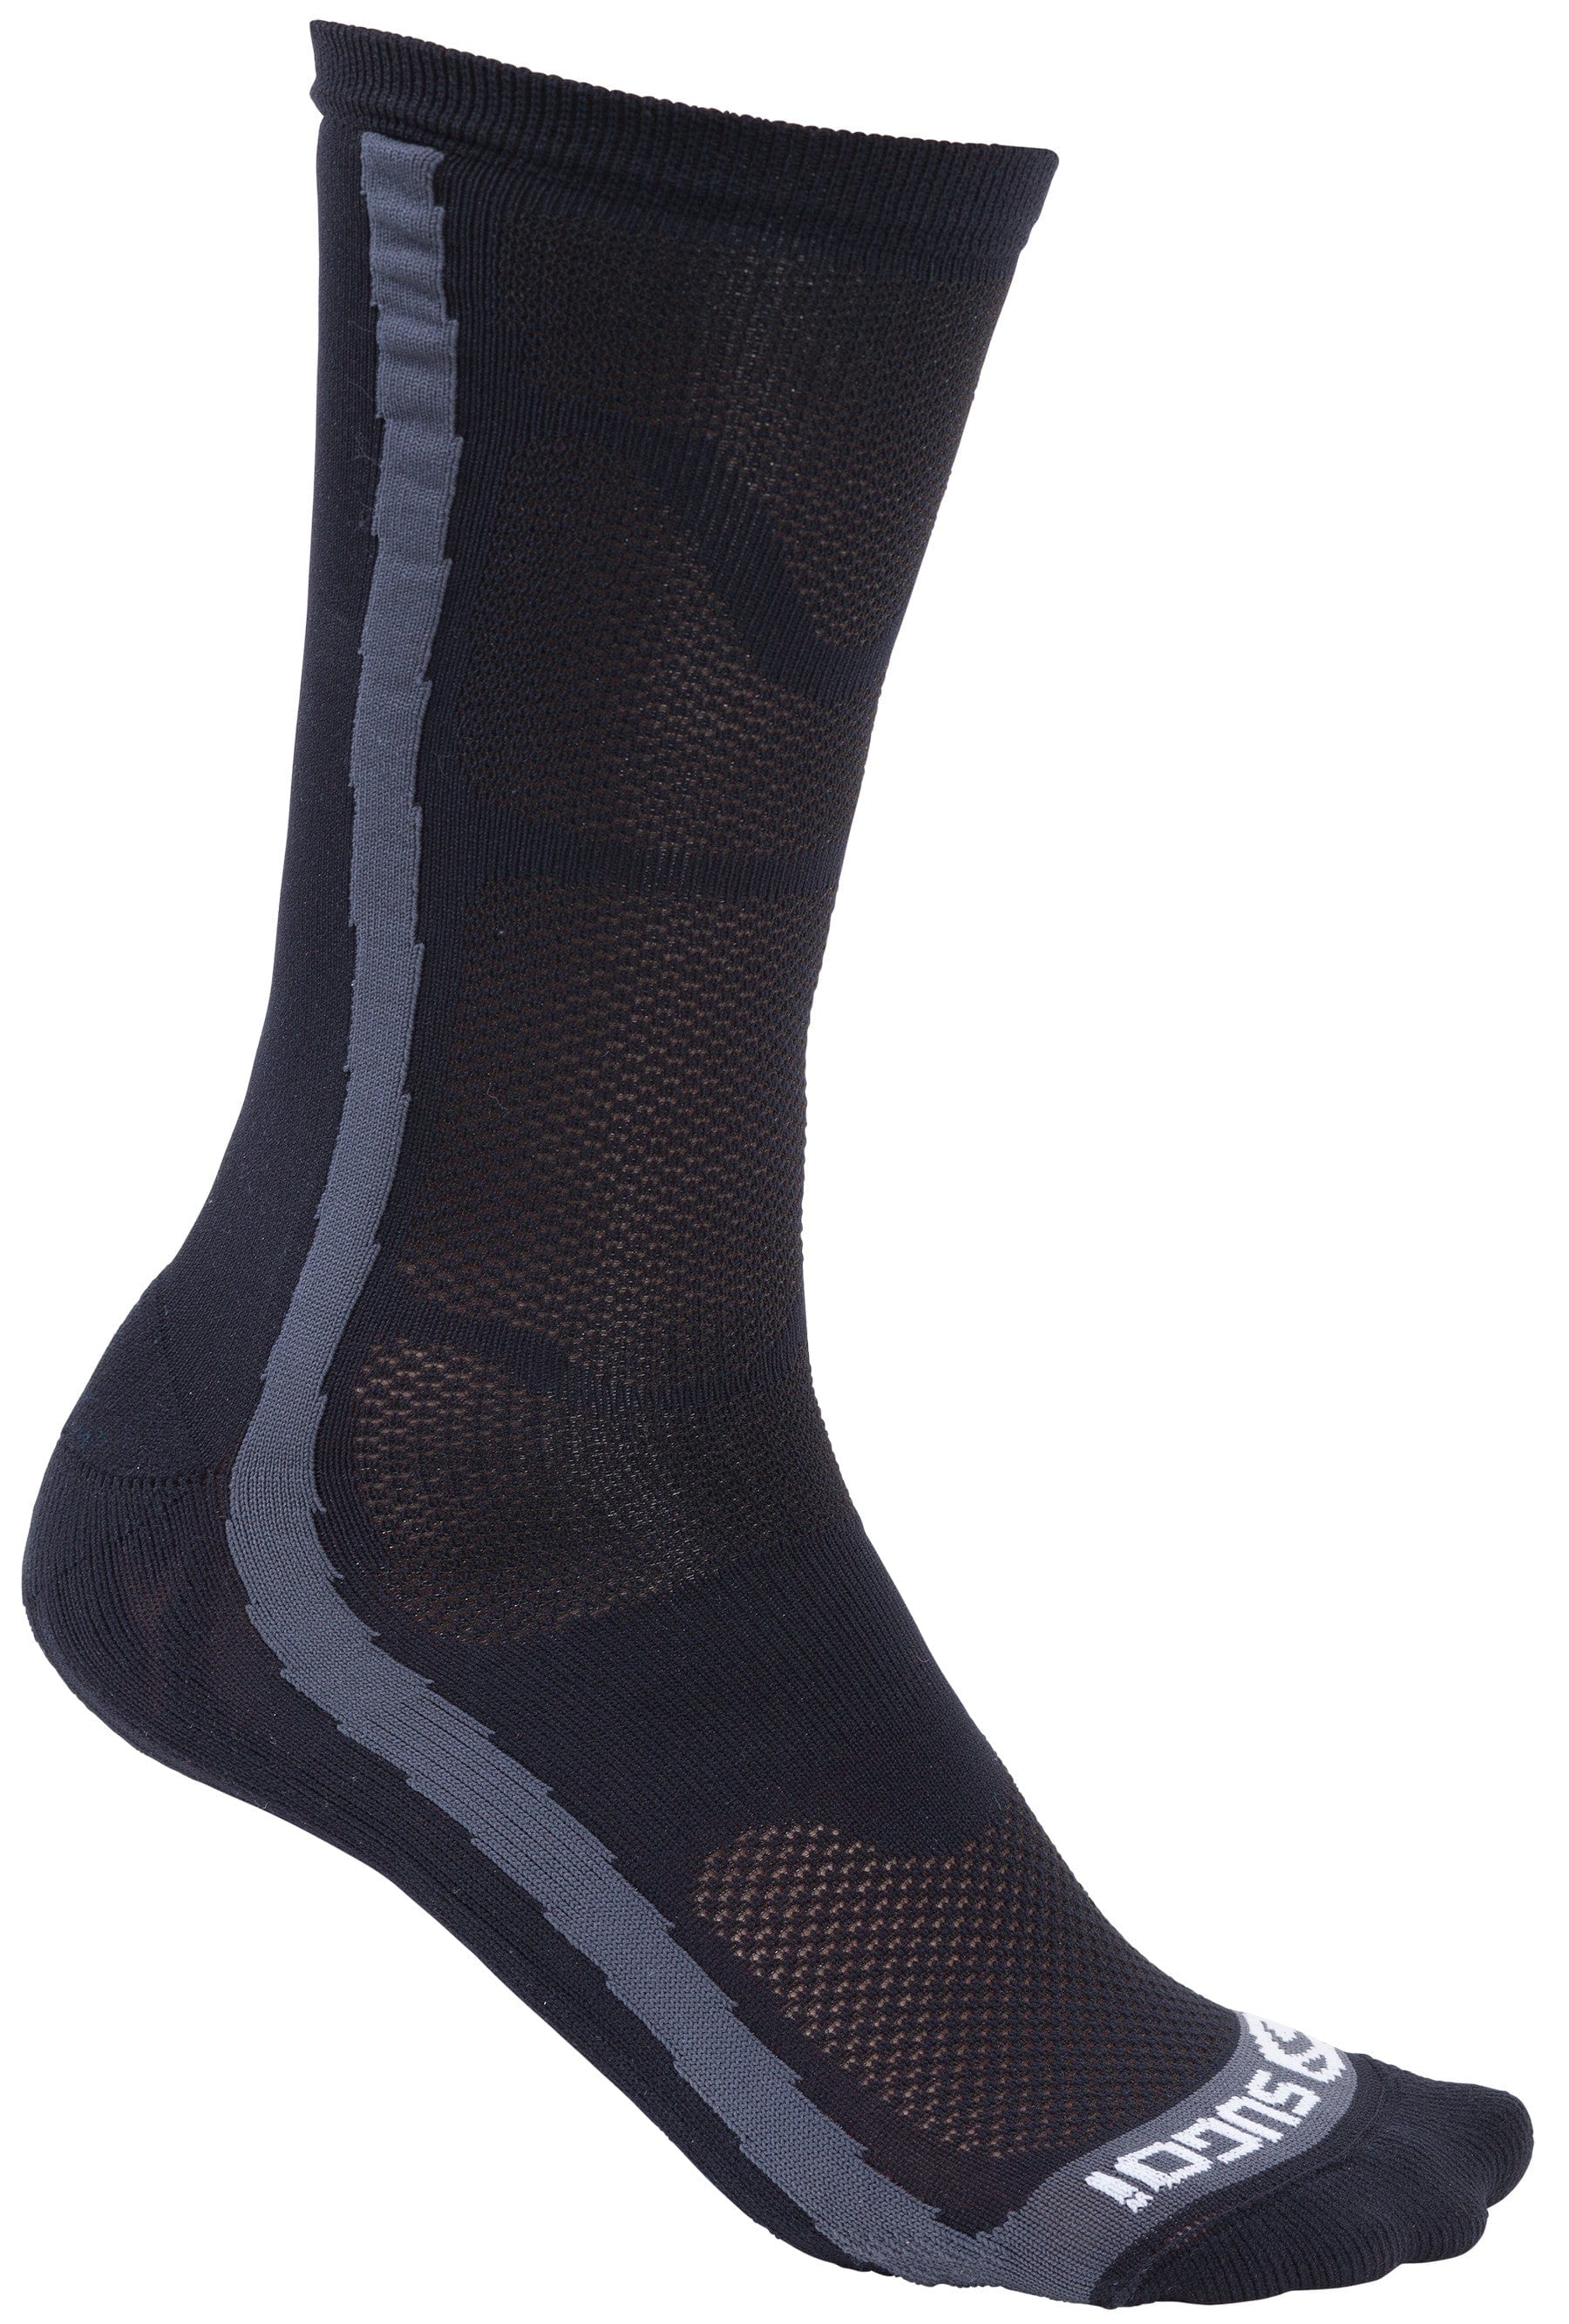 Cycle Tribe Product Sizes Black / M Sugoi RS Crew Cycling Socks